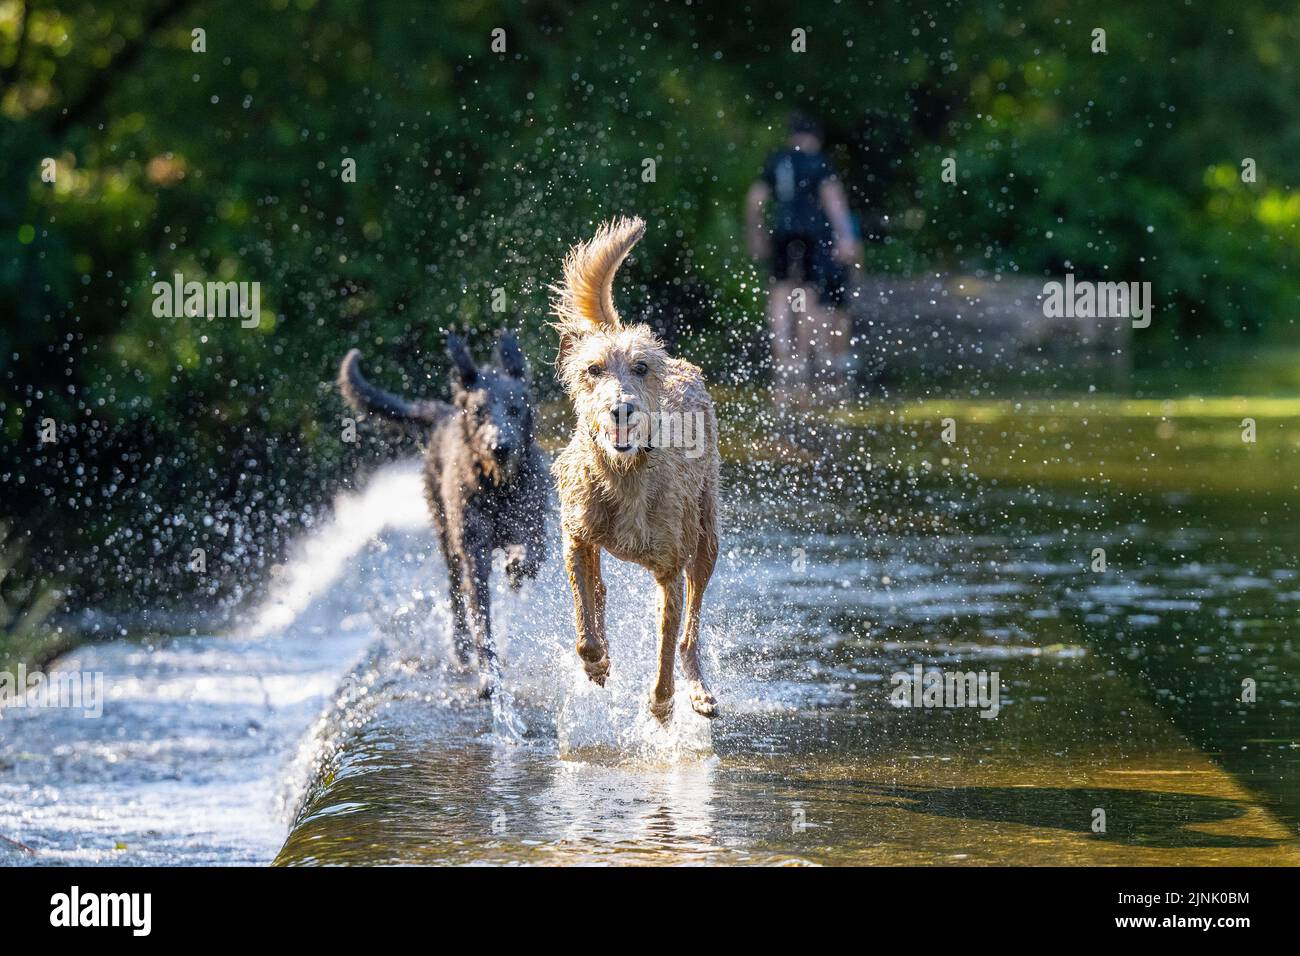 12.08.22. WEATHER SOMERSET.  Two dogs enjoy the water at Warleigh Weir on the River Avon near Bath in Somerset as temperatures continue to soar across Stock Photo